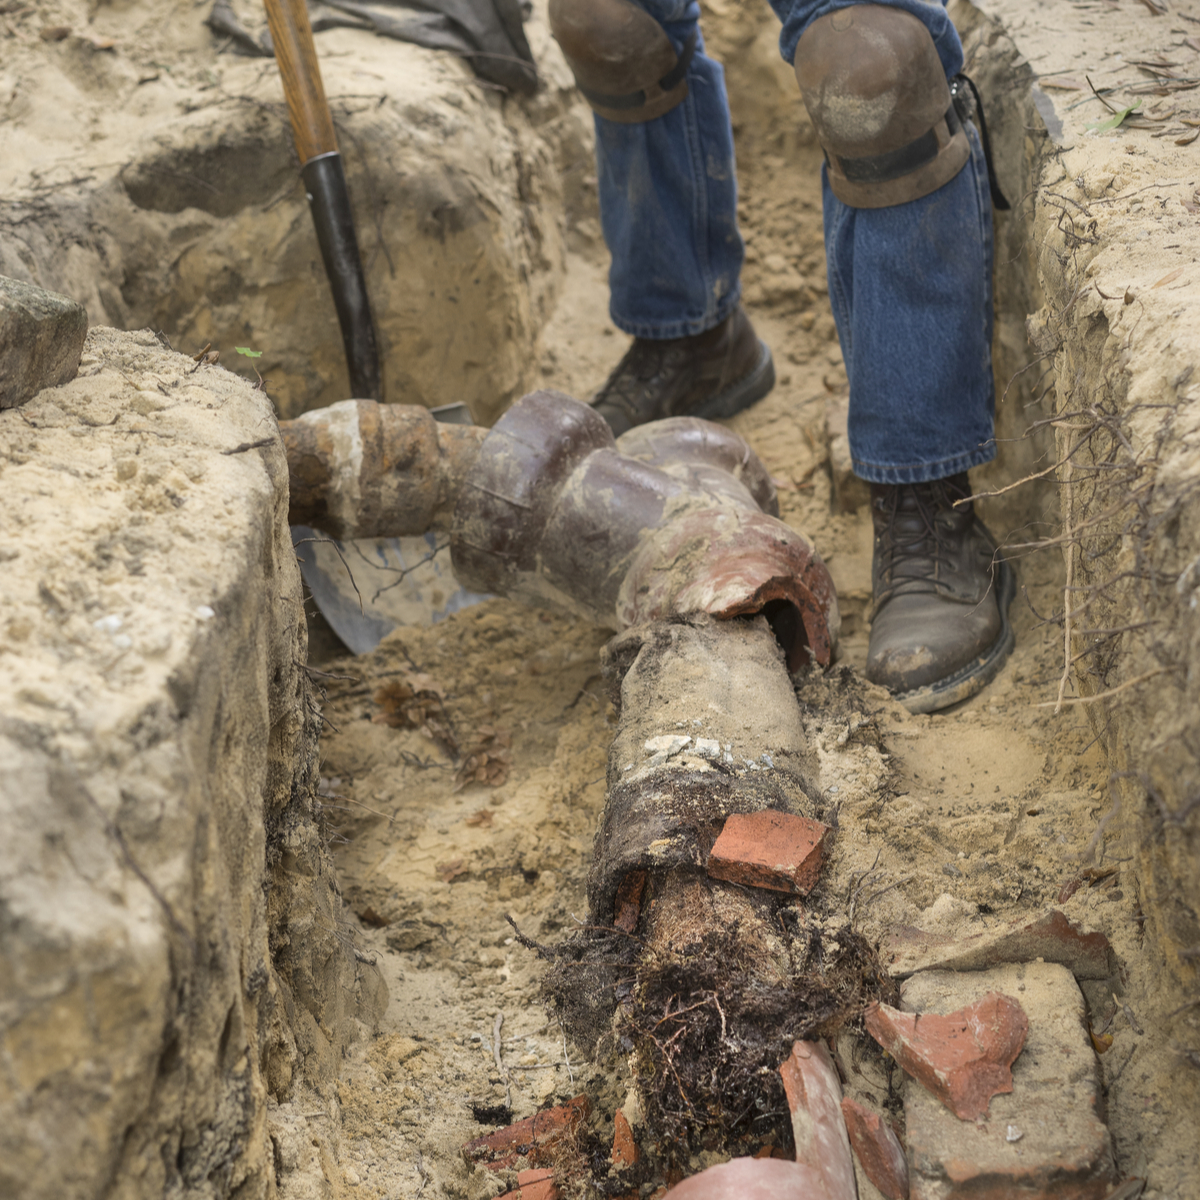 Do You Have Concrete or Clay Sewer Lines In Arlington?